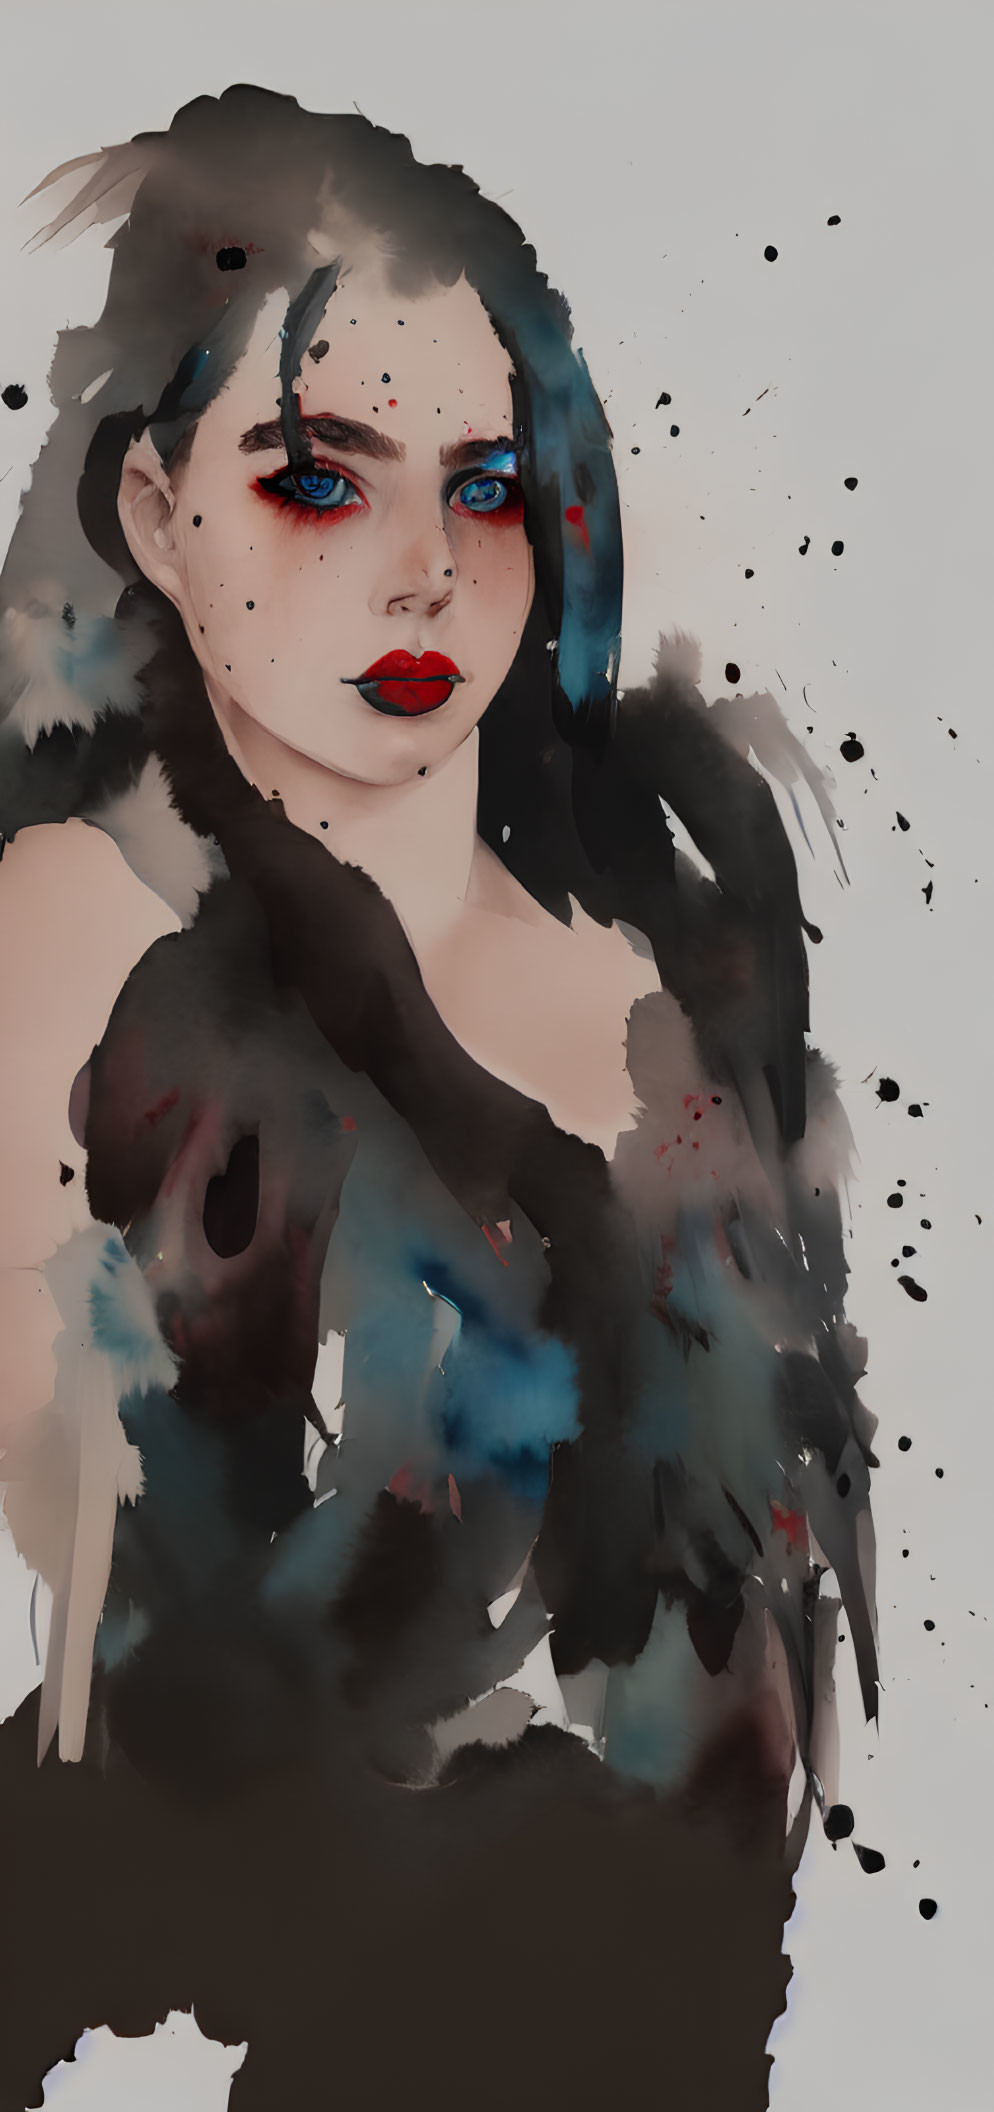 Woman with Striking Red Lips and Blue Eyes in Edgy Ink Splatter Illustration